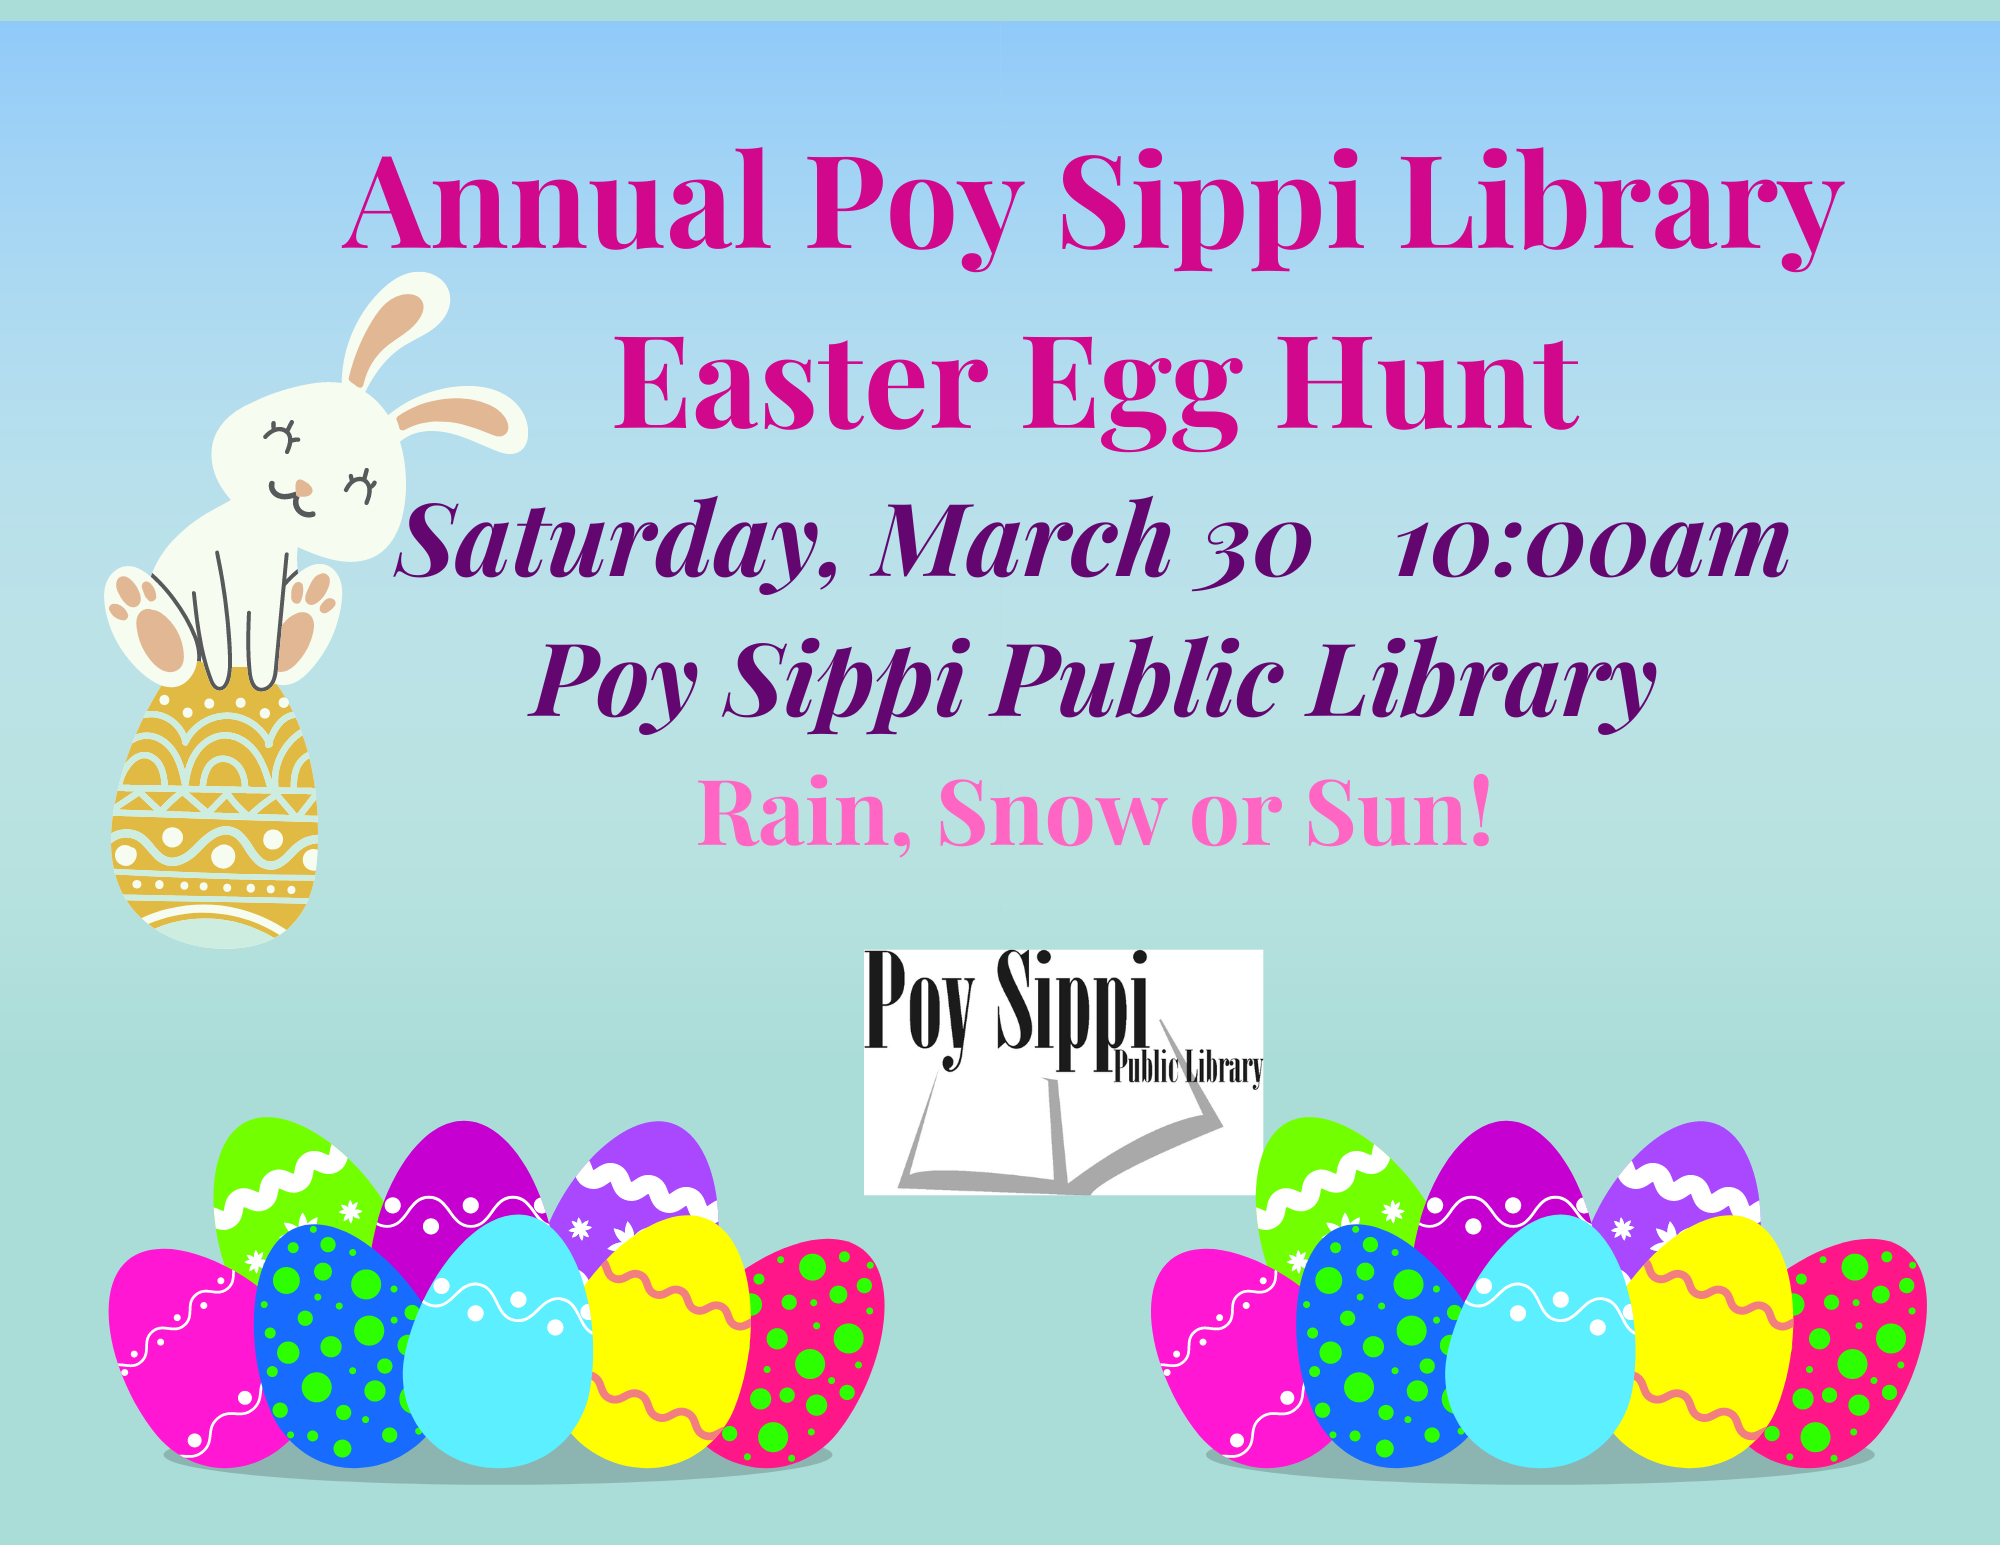 Annual Poy Sippi Library Easter Egg Hunt